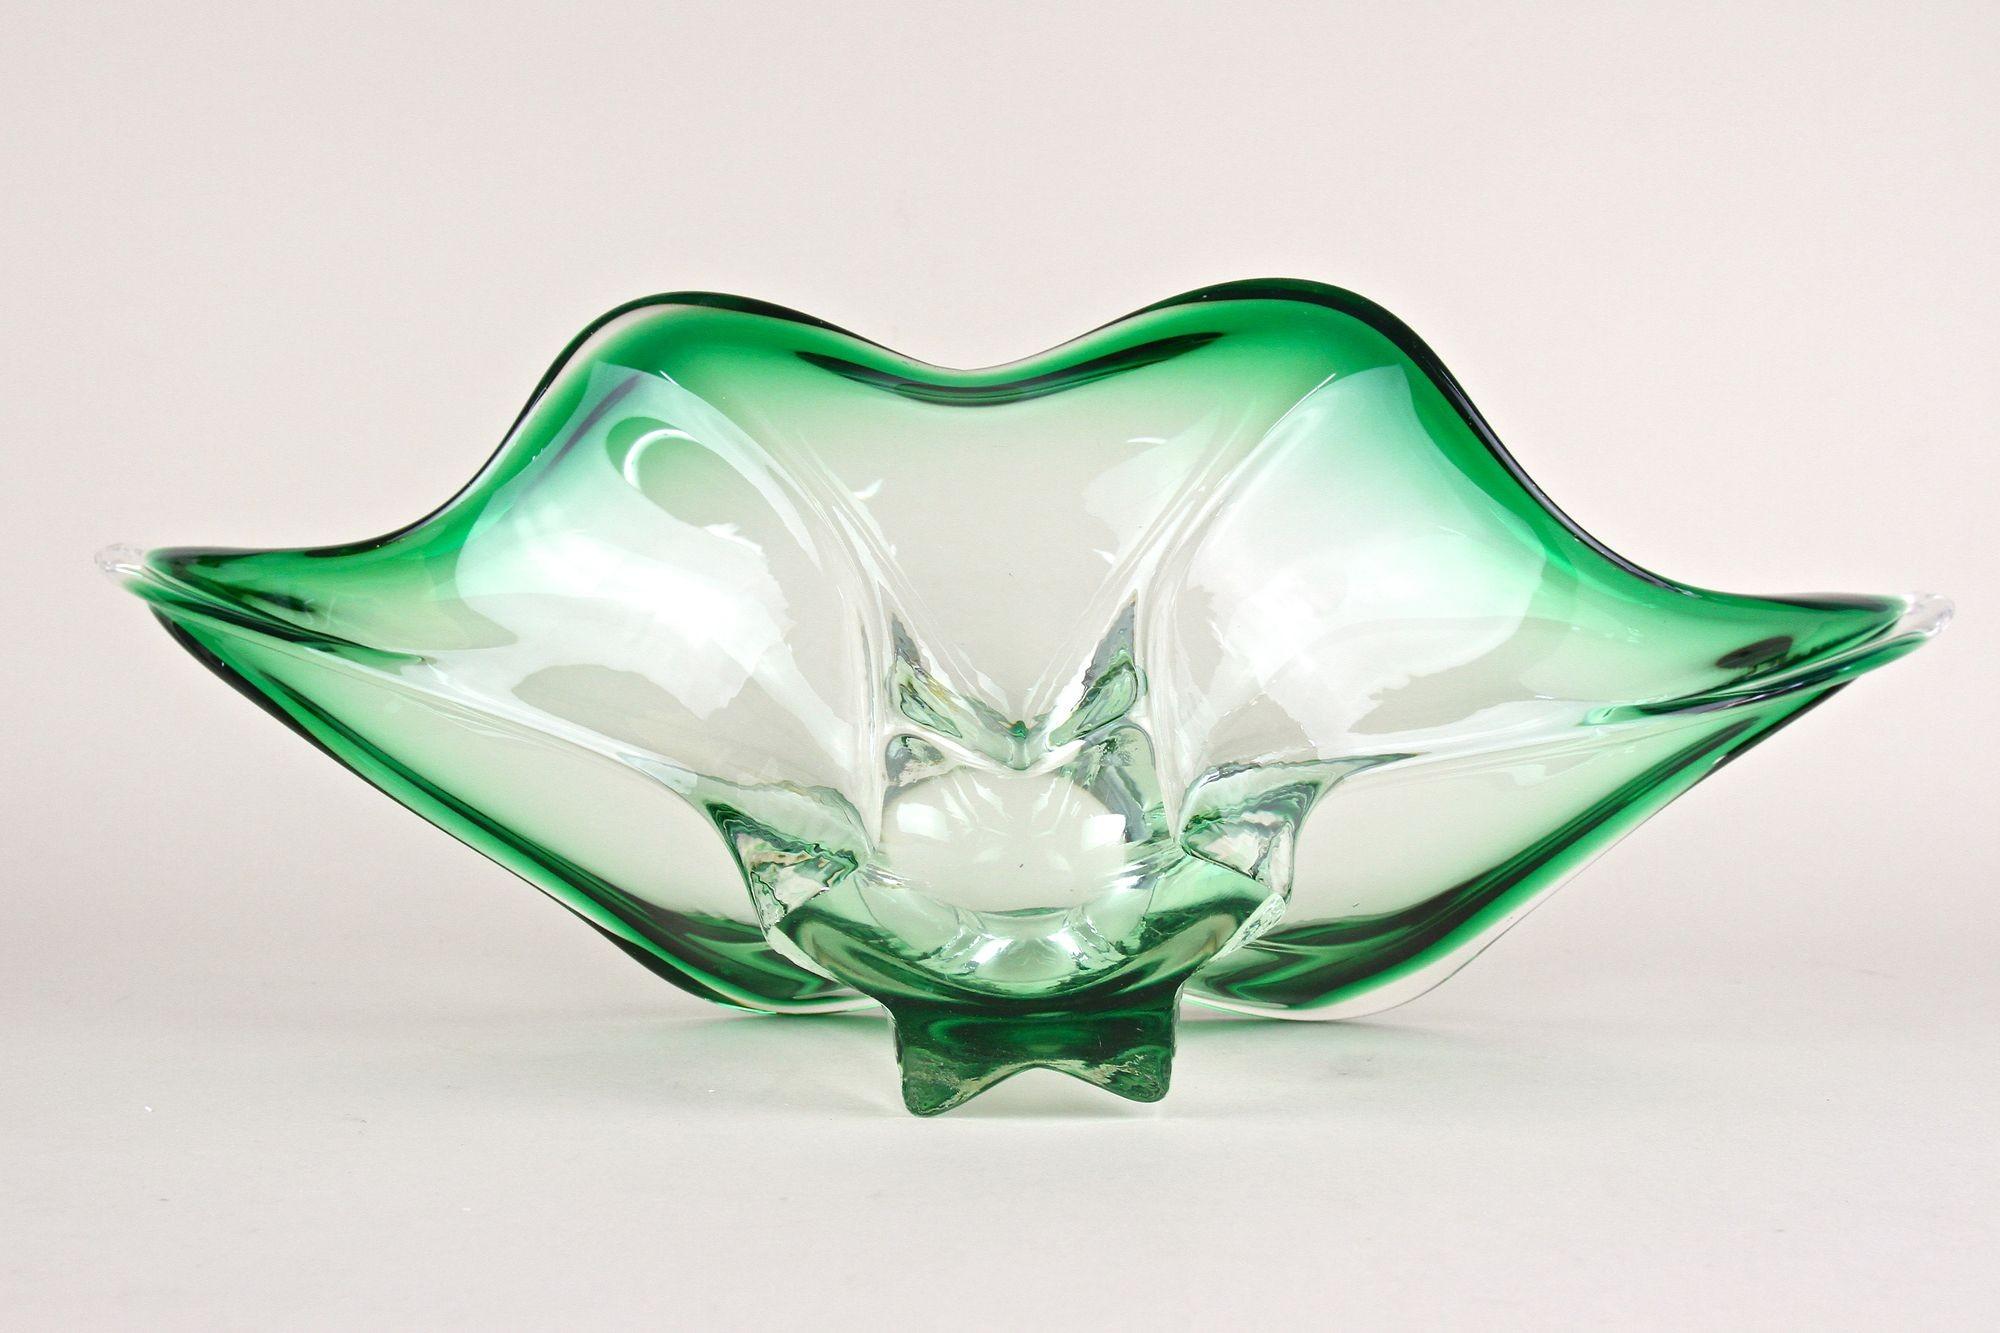 Mid Century Modern Murano Glass Bowl, Green/ Clear Tones - Italy ca. 1960 For Sale 6